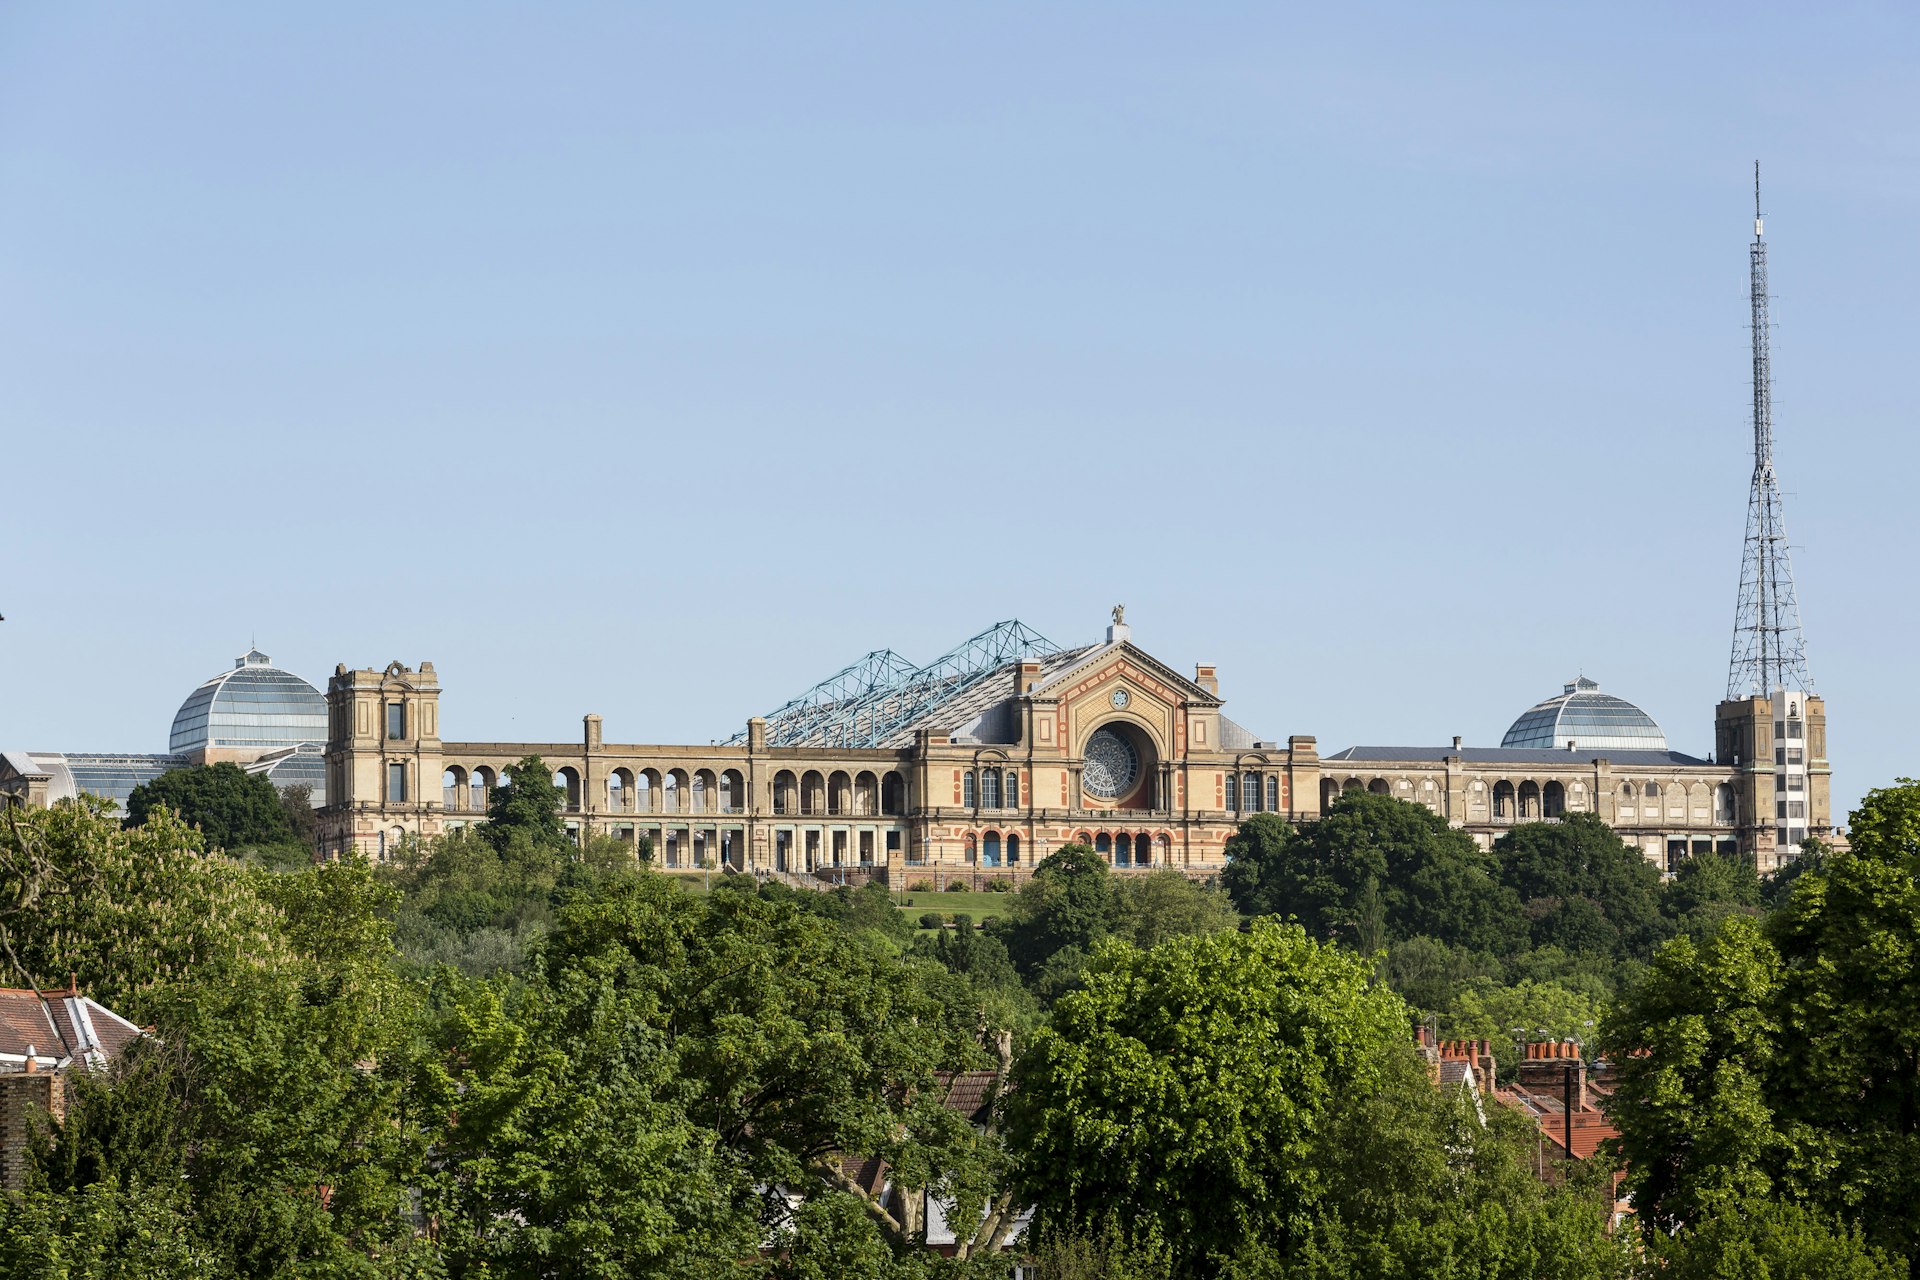 Alexandra Palace positioned on a hilltop in London, with green trees in the foreground.